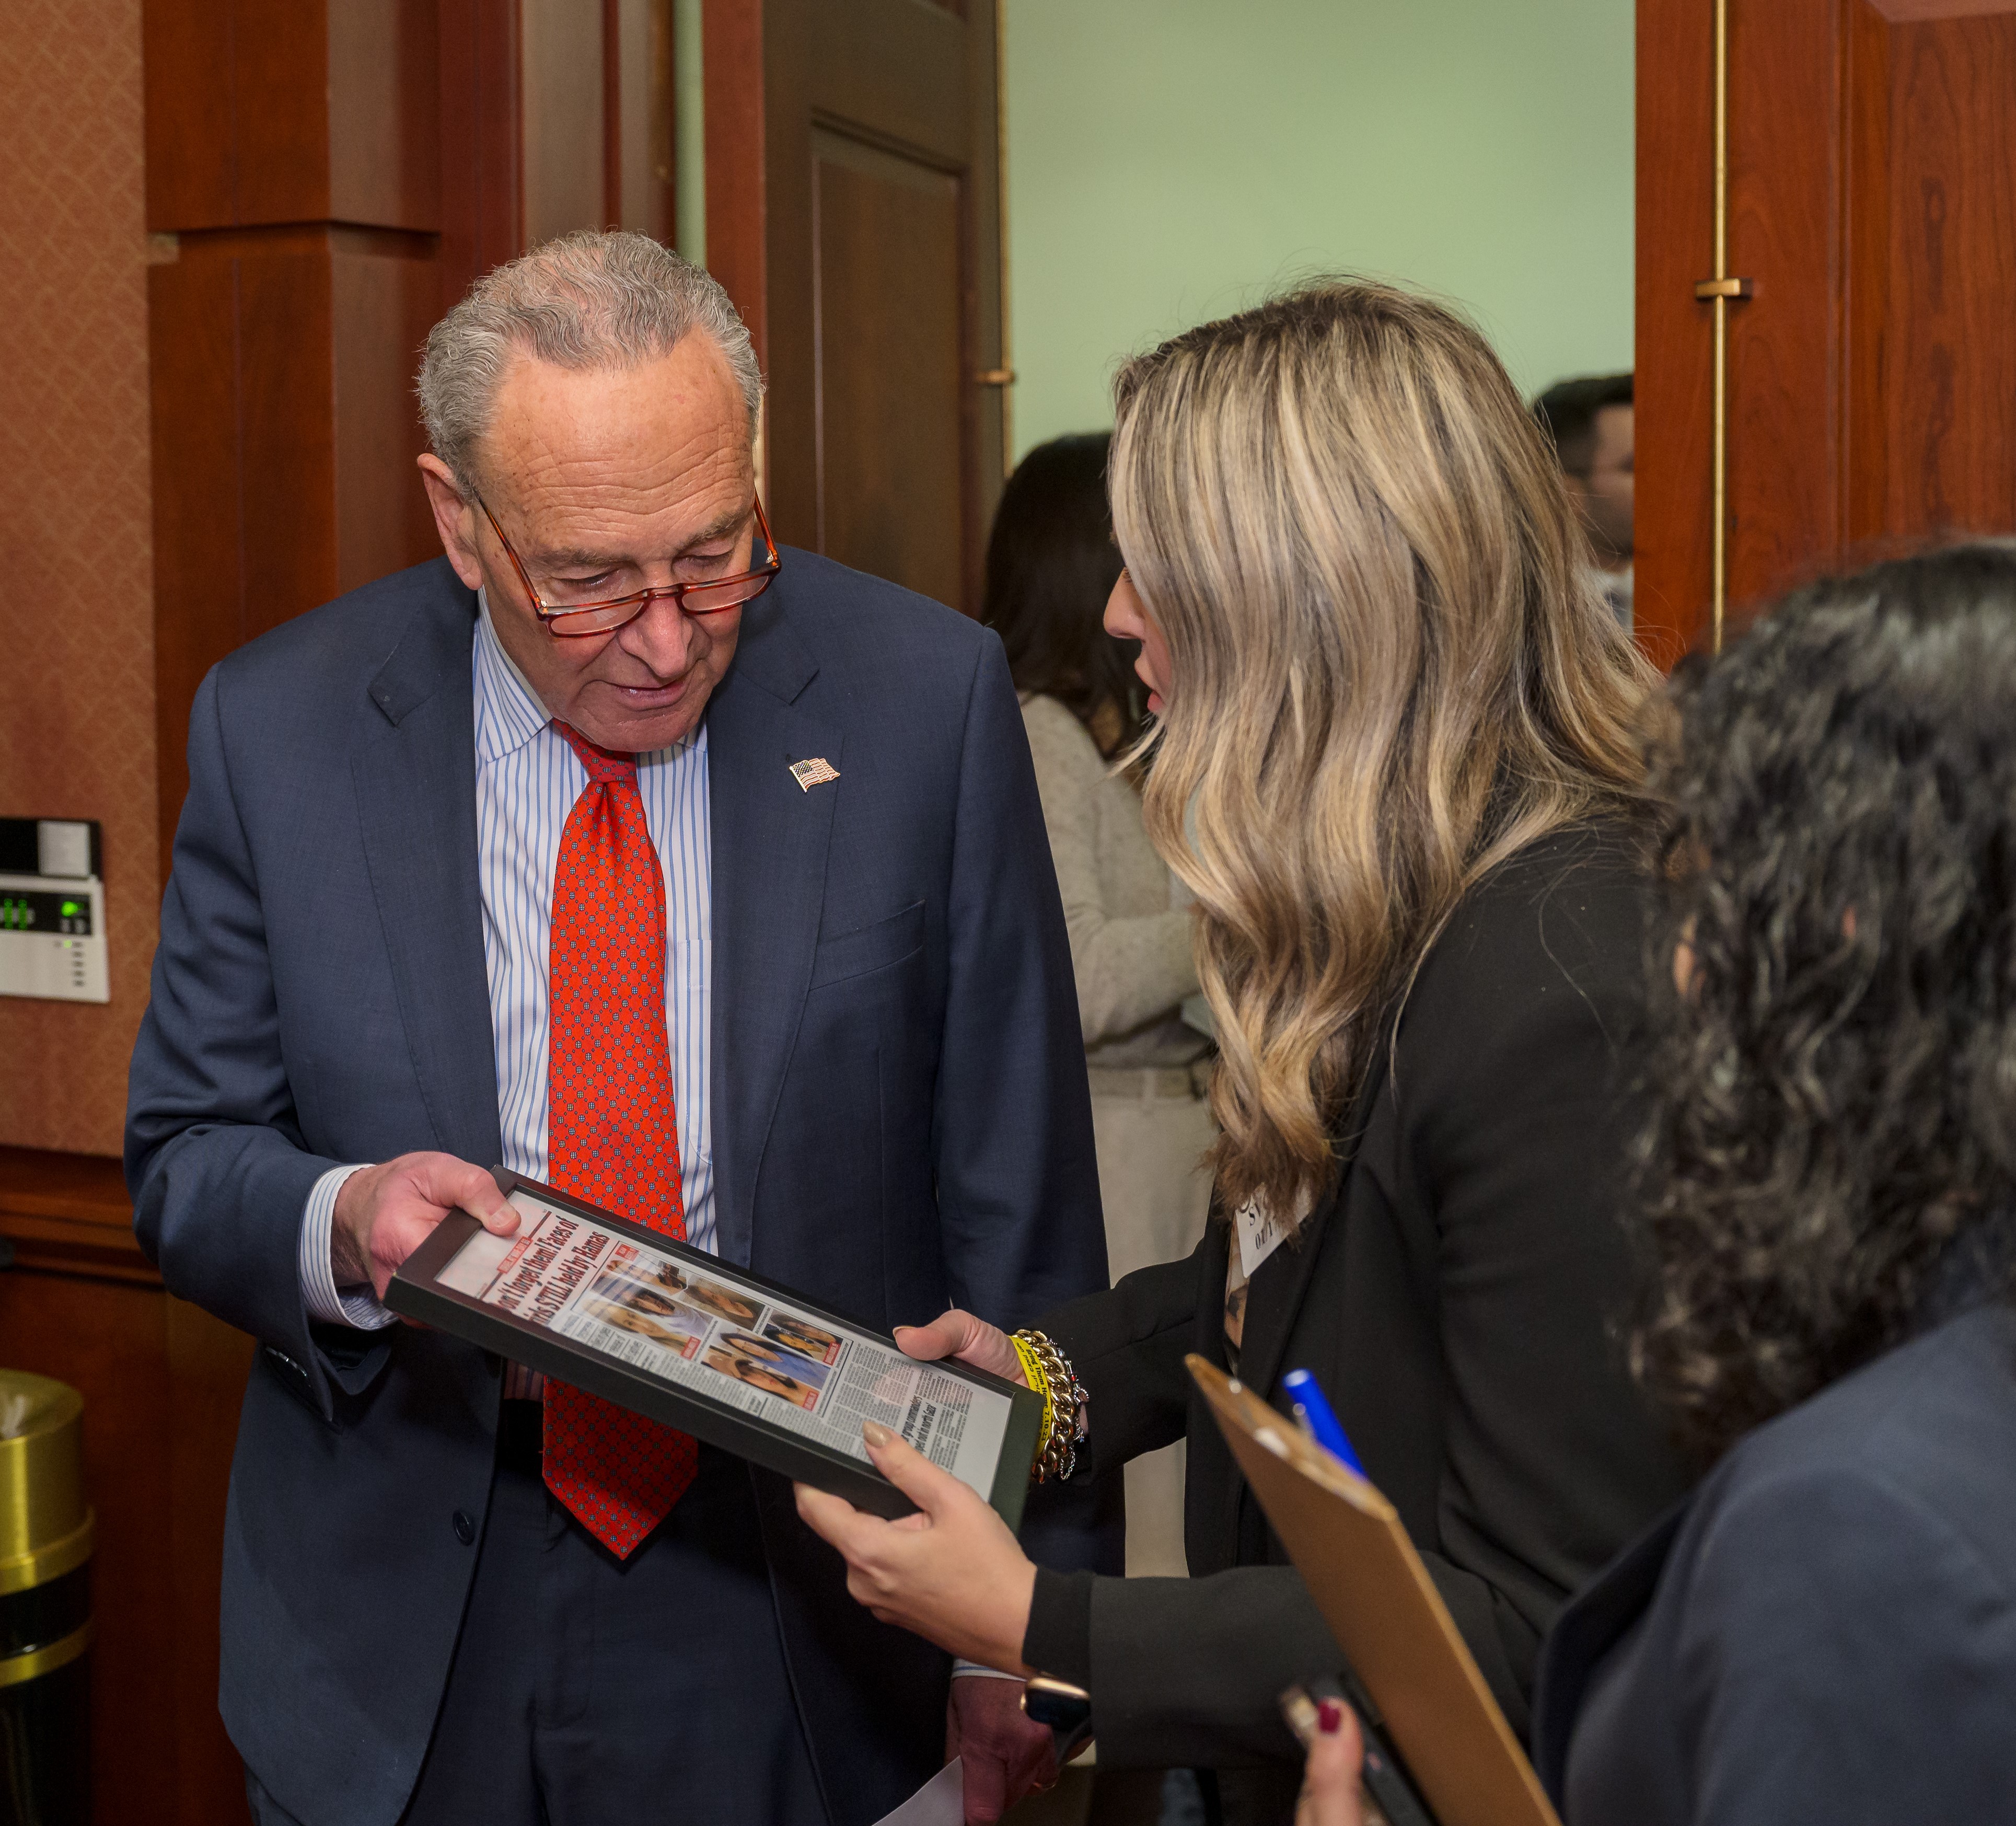 Schumer with Families_1 - Copy